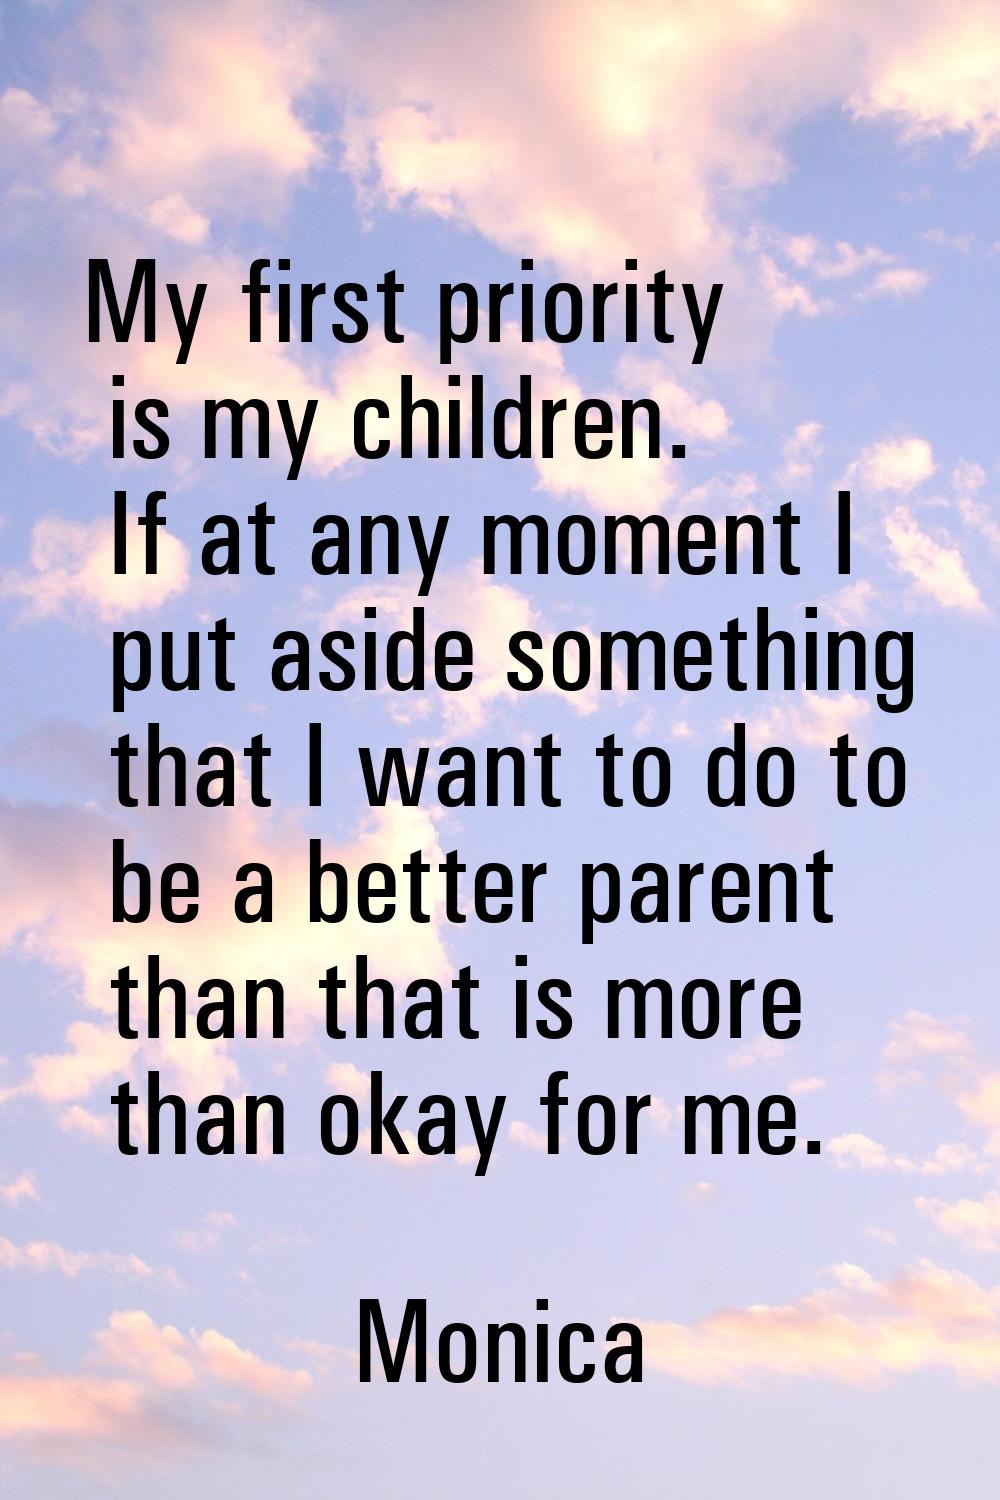 My first priority is my children. If at any moment I put aside something that I want to do to be a 